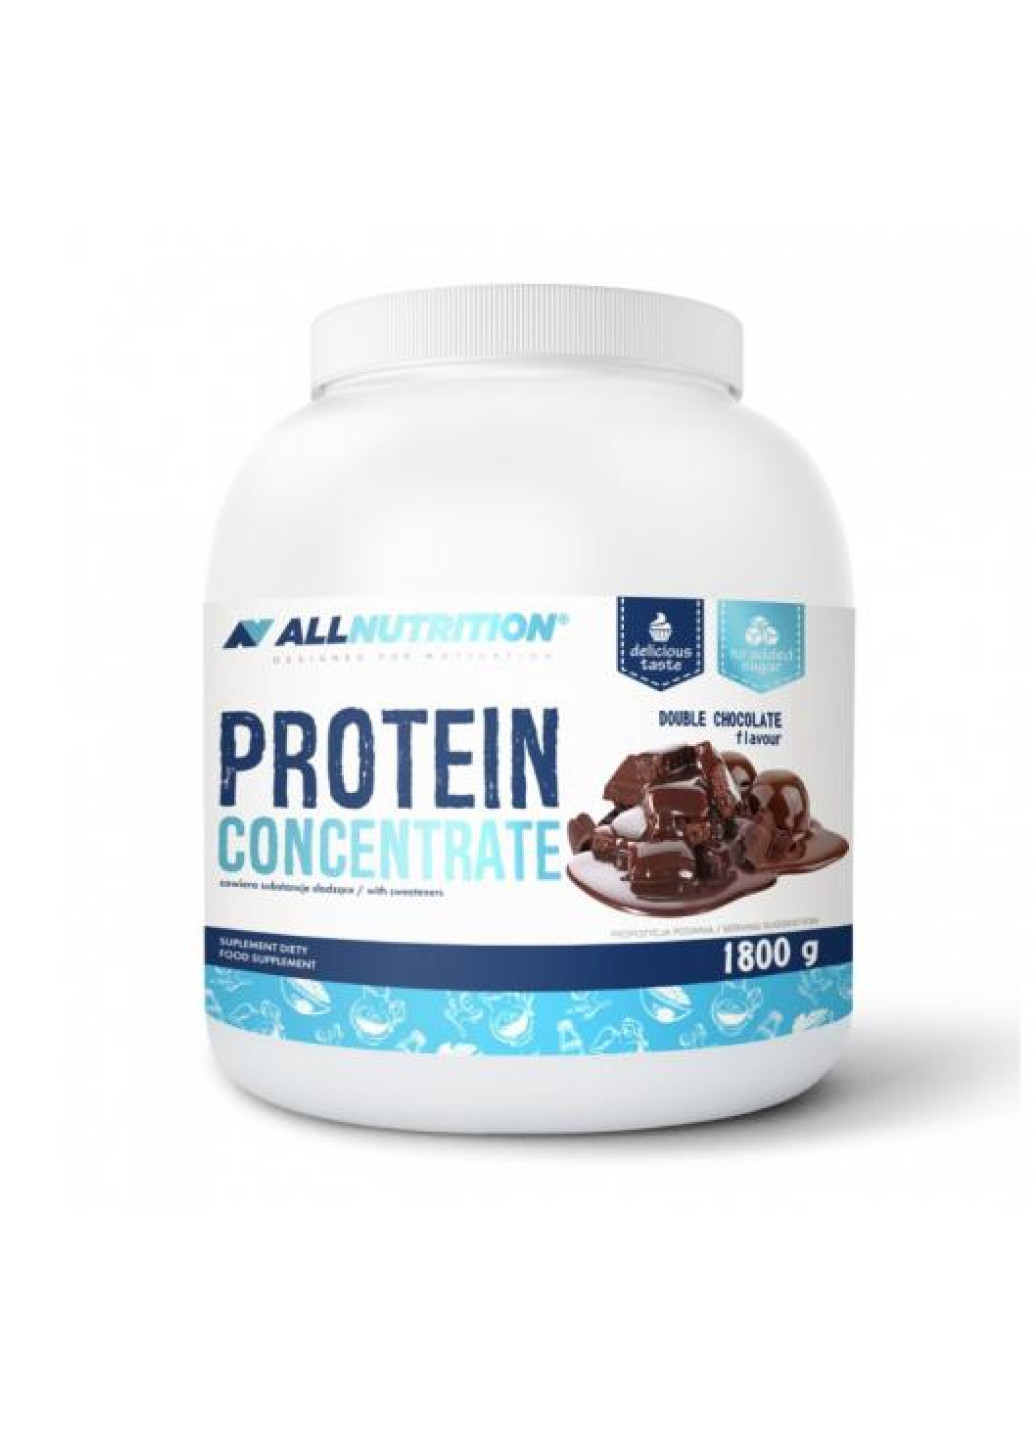 Протеин концентрат для набора массы мышц Protein Concentrate - 1800g Double Chocolate Allnutrition (254805163)